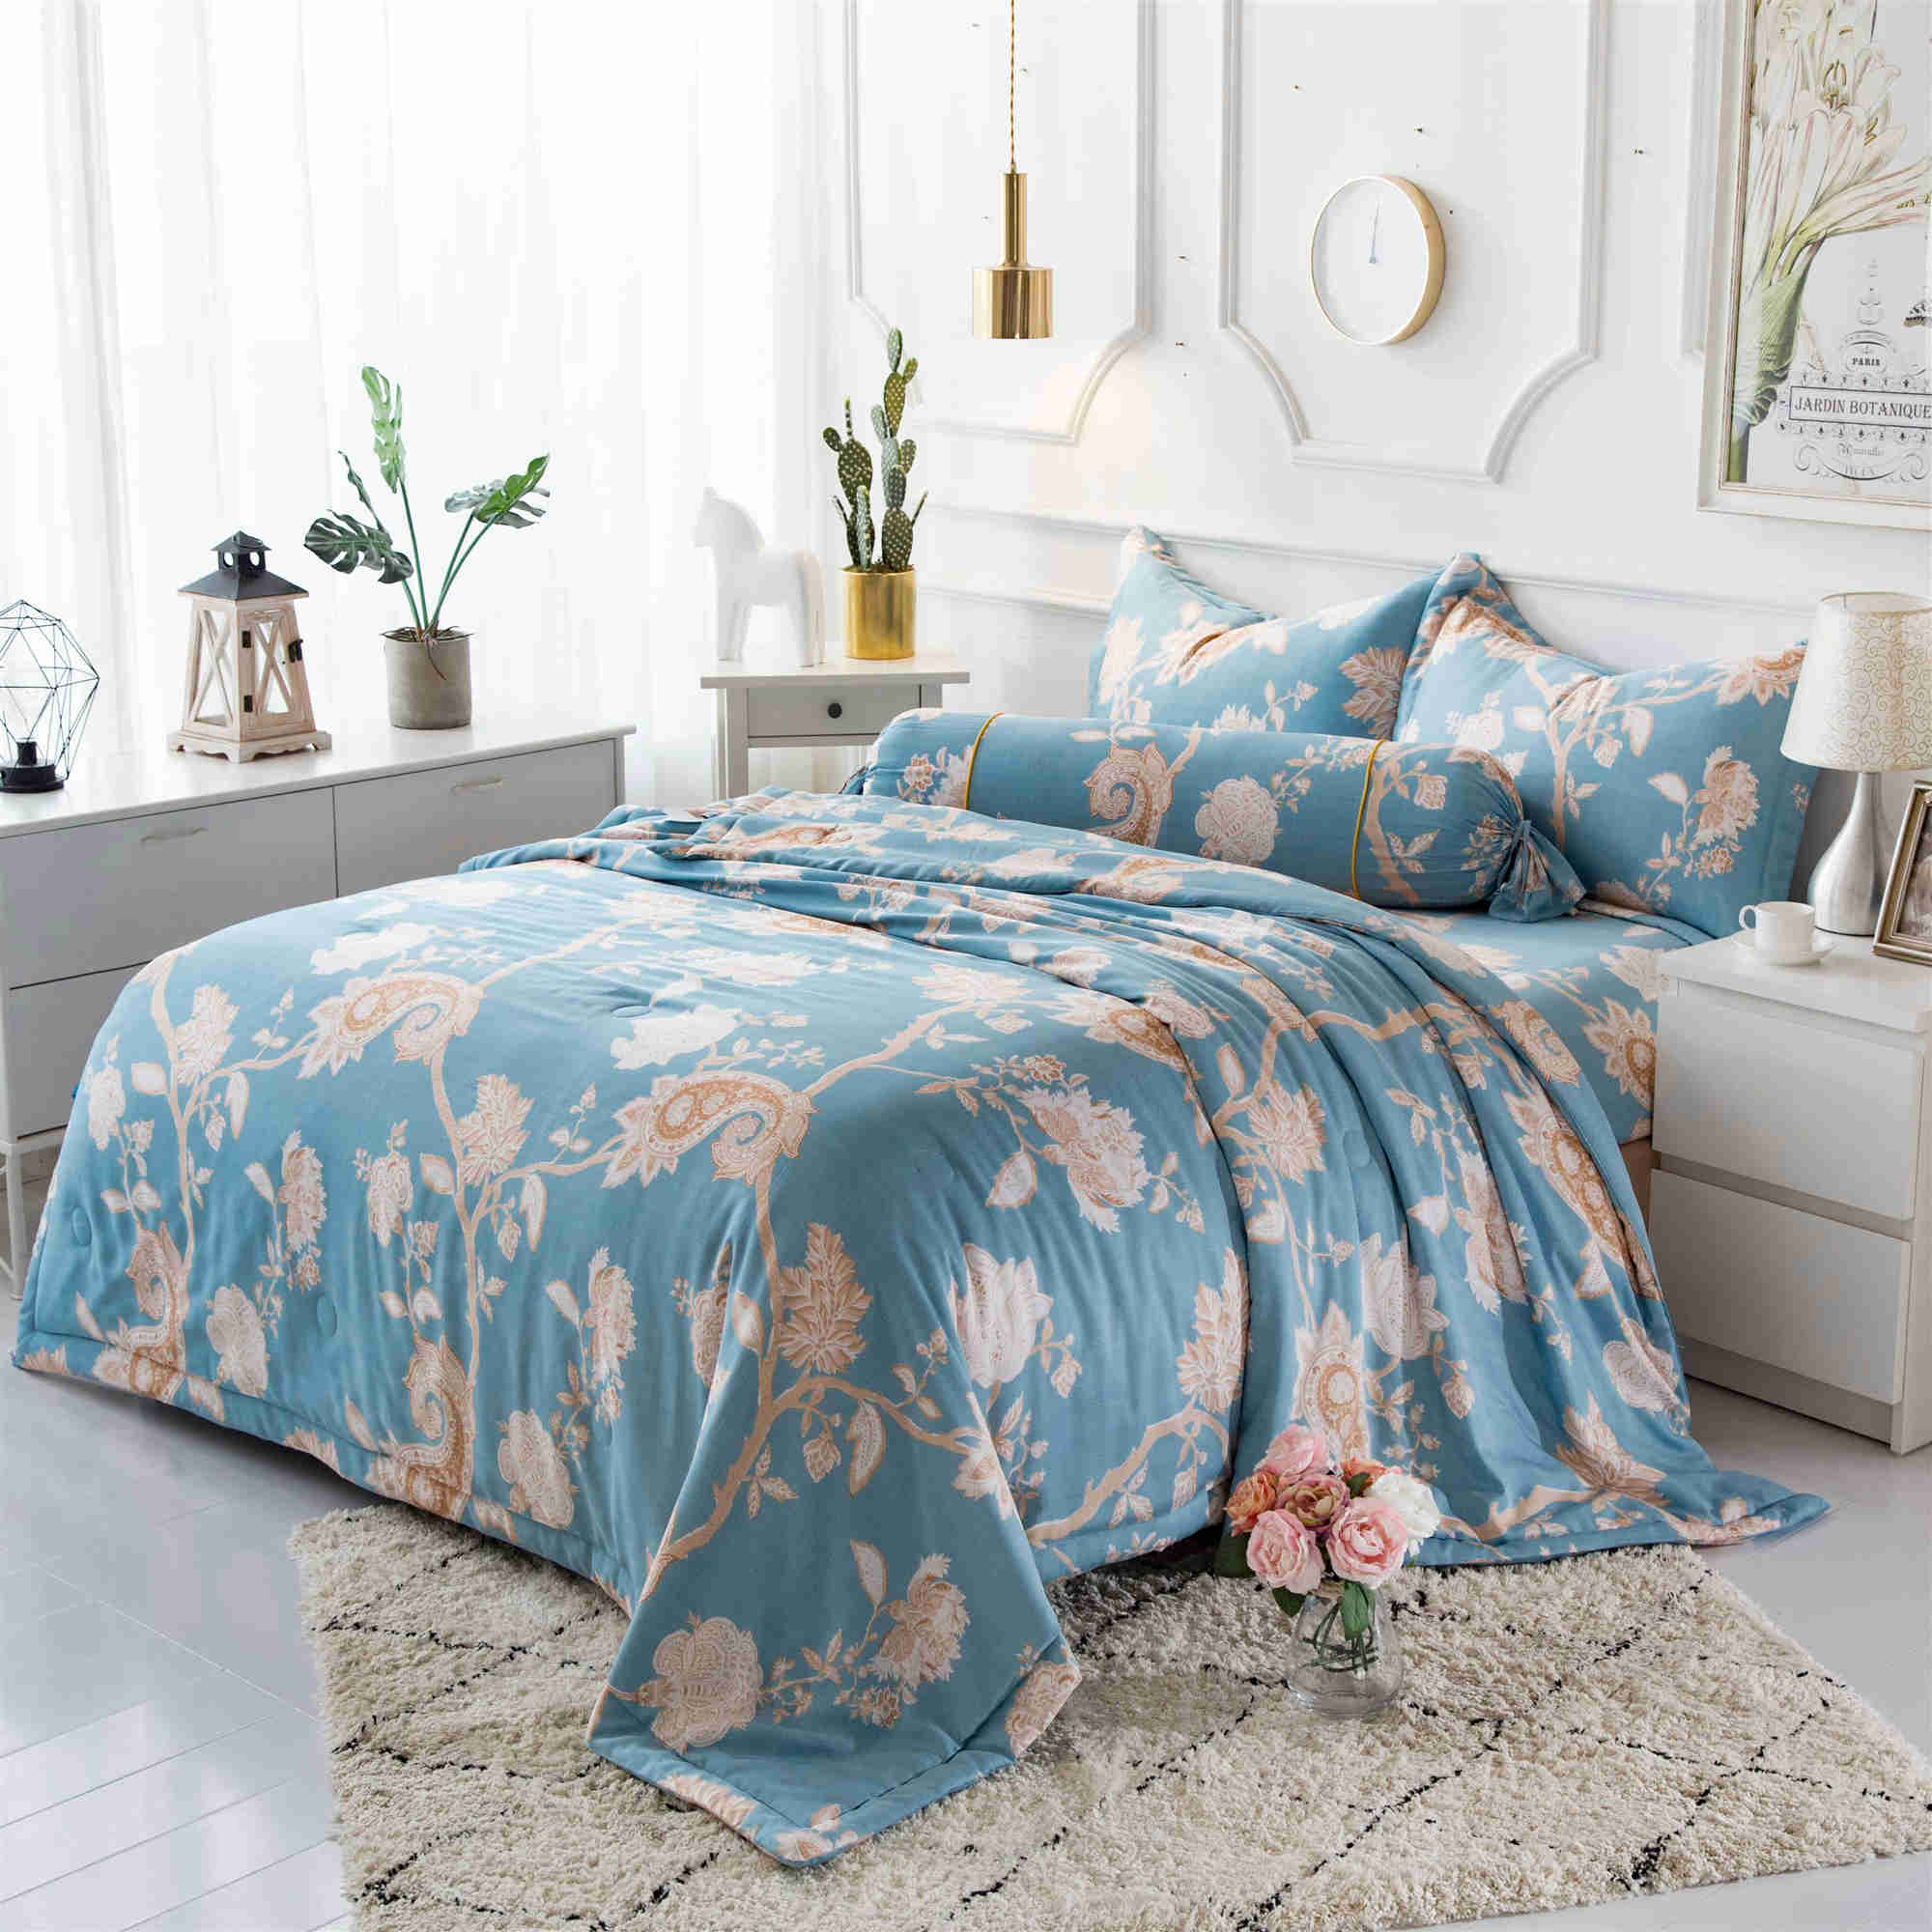 Tencel modal bedding and bed Fitted comforter sets